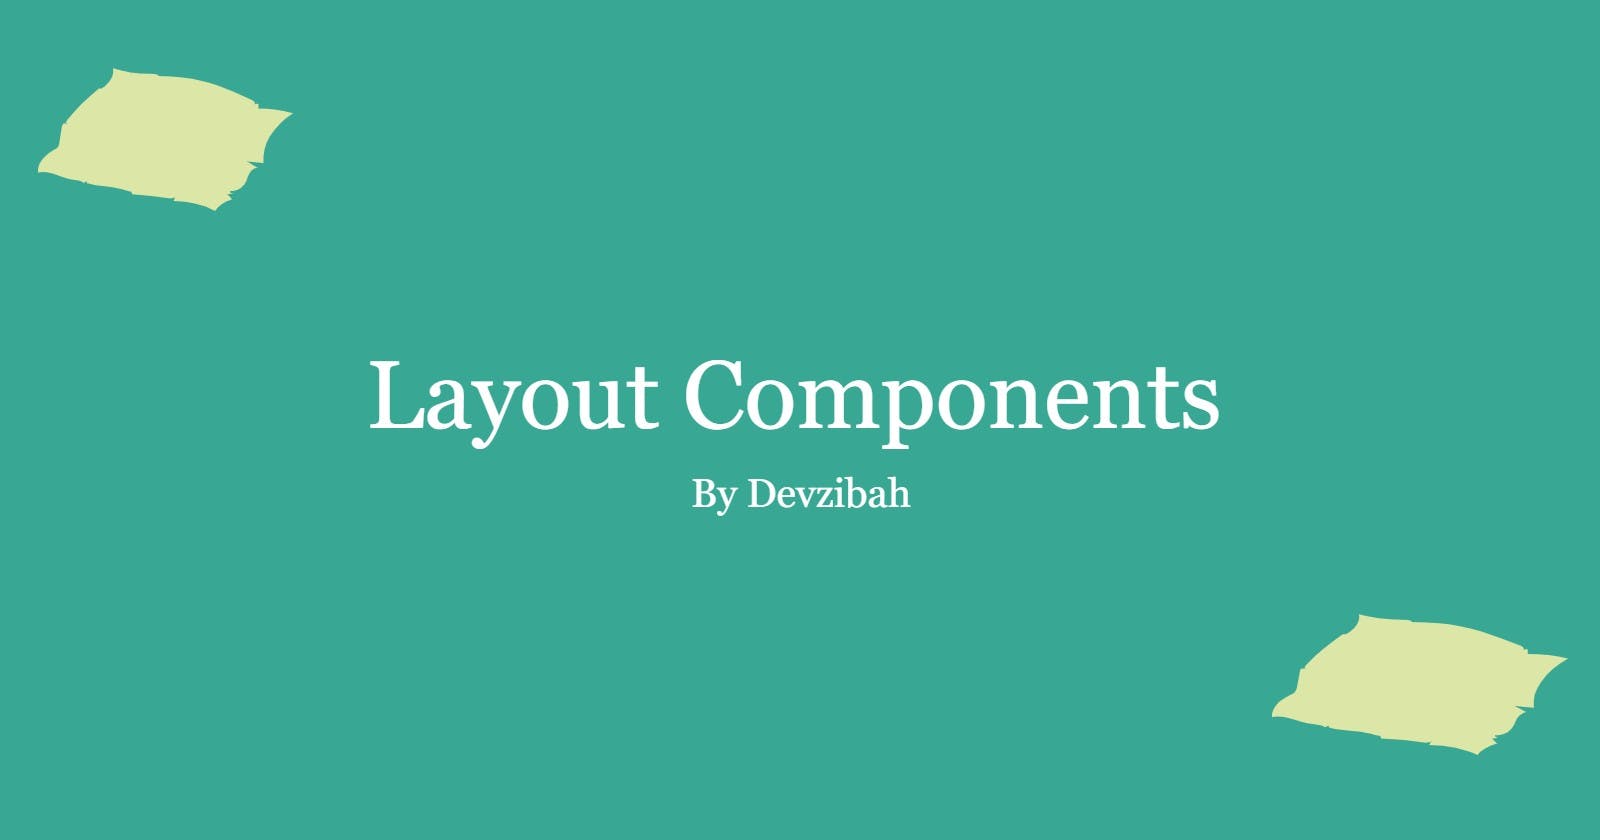 How to avoid redundancy through the use of  Layout Components in React